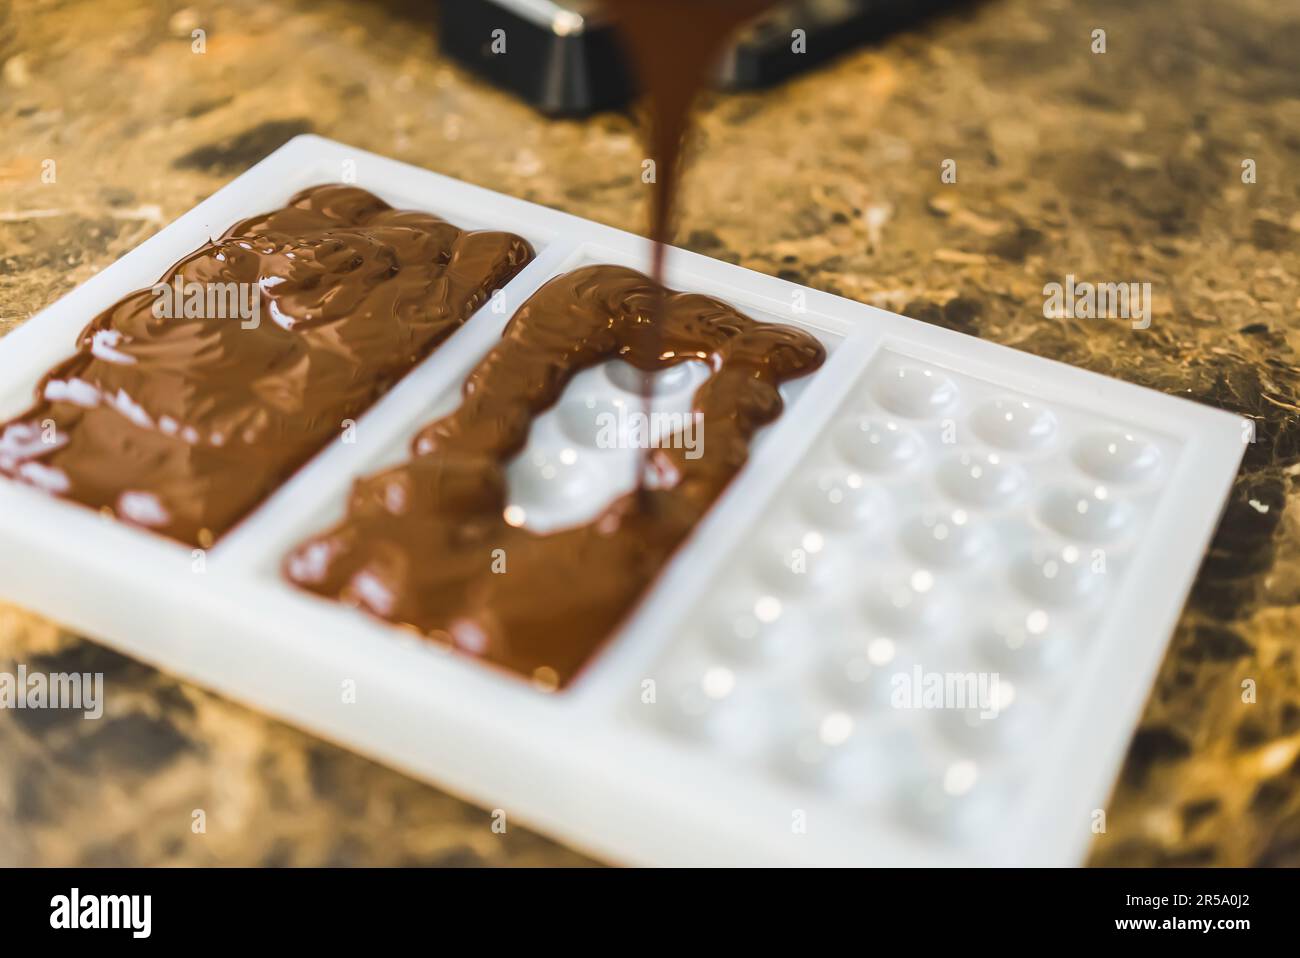 chocolatier pouring caramel filling into chocolate mold preparing handmade  candy Stock Photo - Alamy